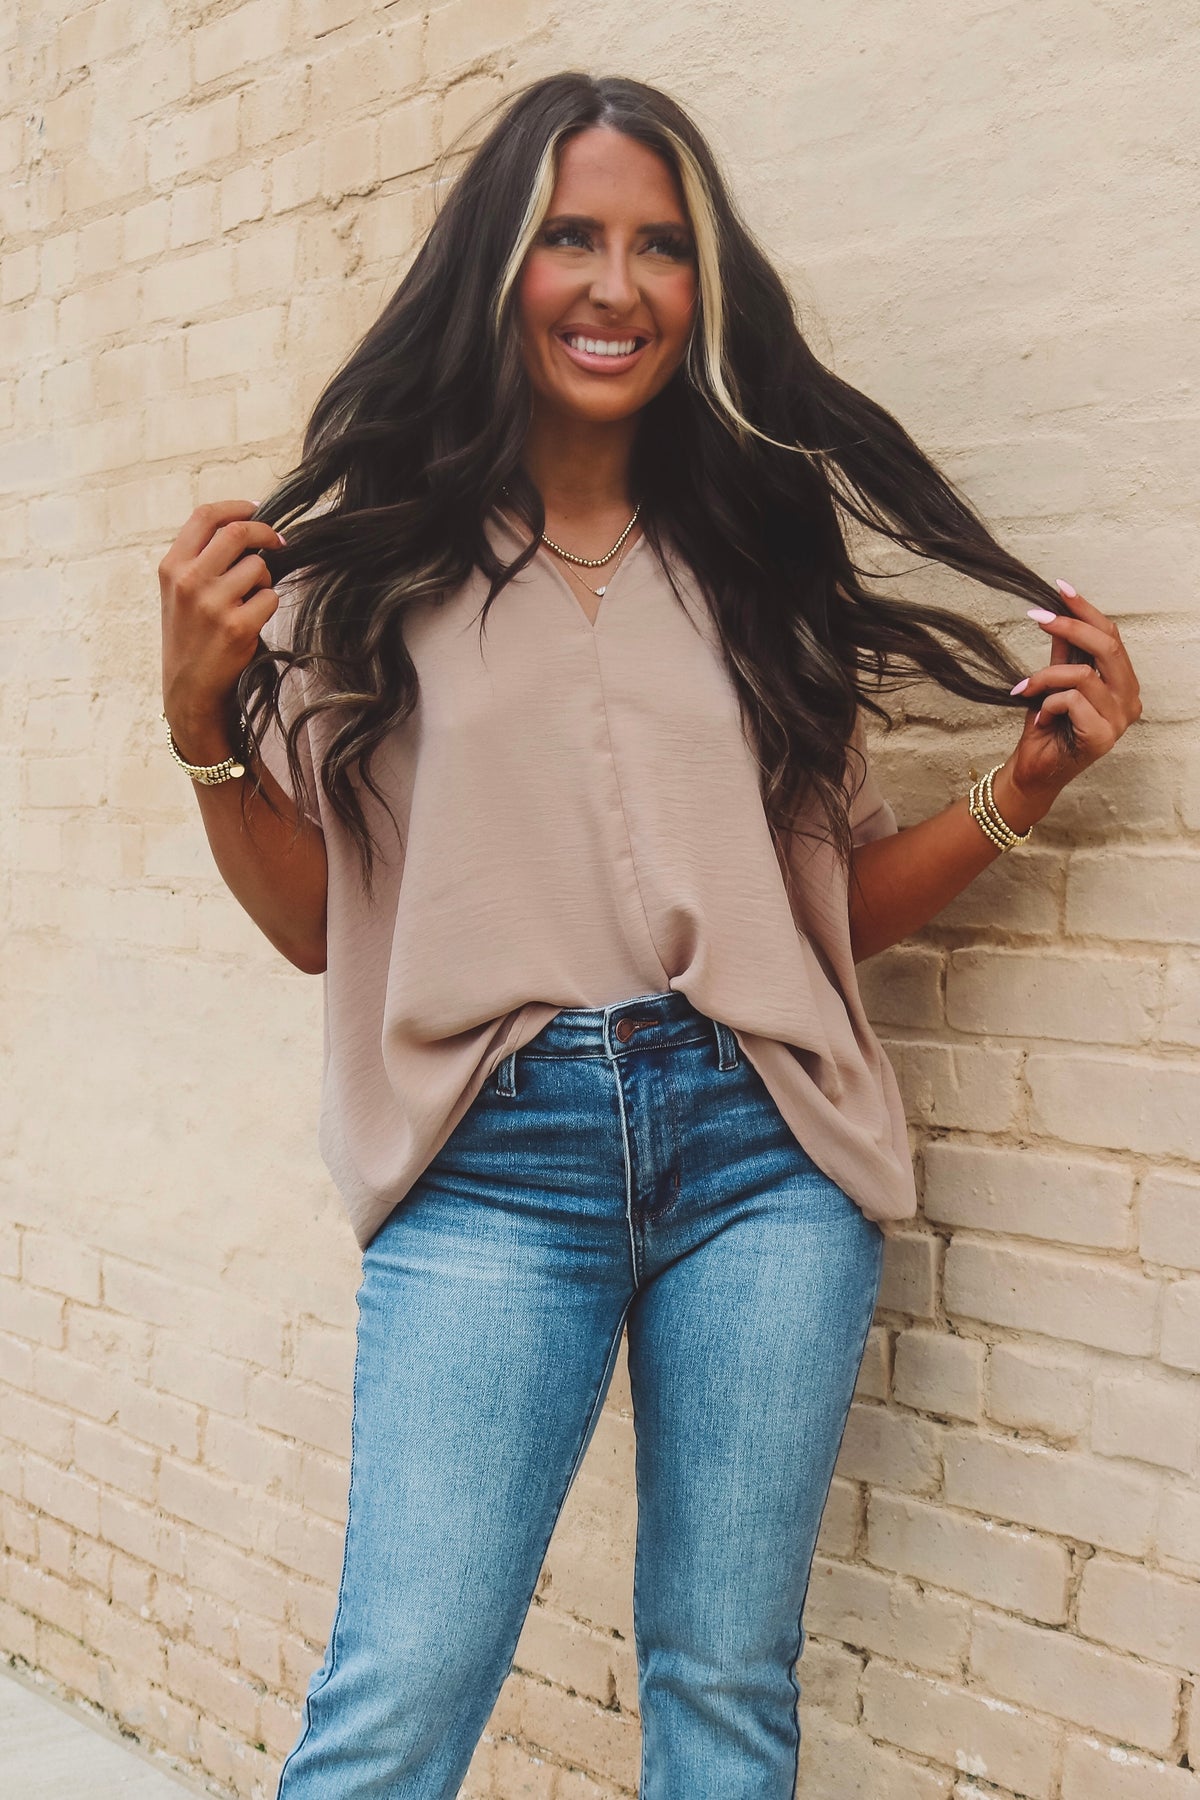 Trista Top in Taupe